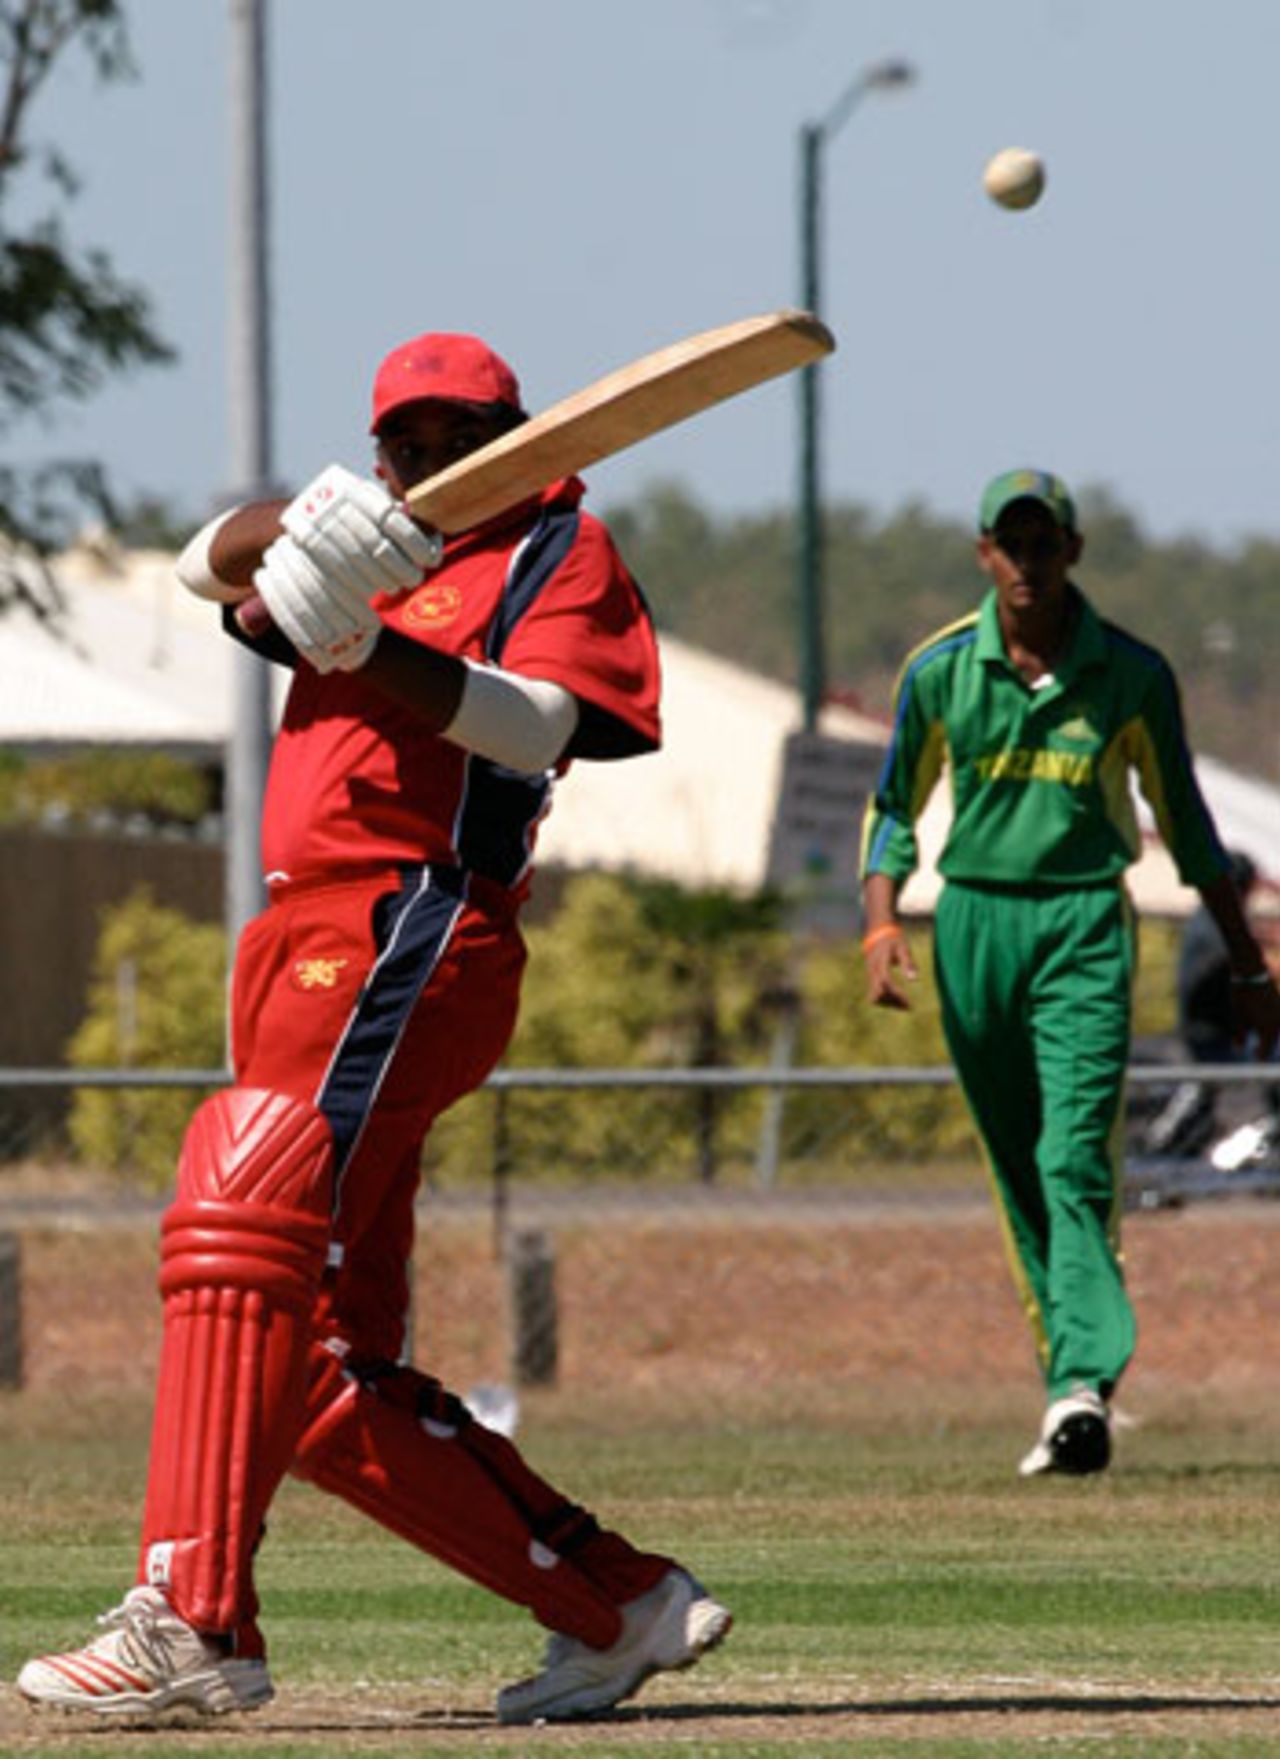 Rahul Sharma hooks the ball for four during his final innings for Hong Kong against Tanzania. Power Park, ICC WCL Division 3 (5th/6th Play-off) - 20.06.2007 